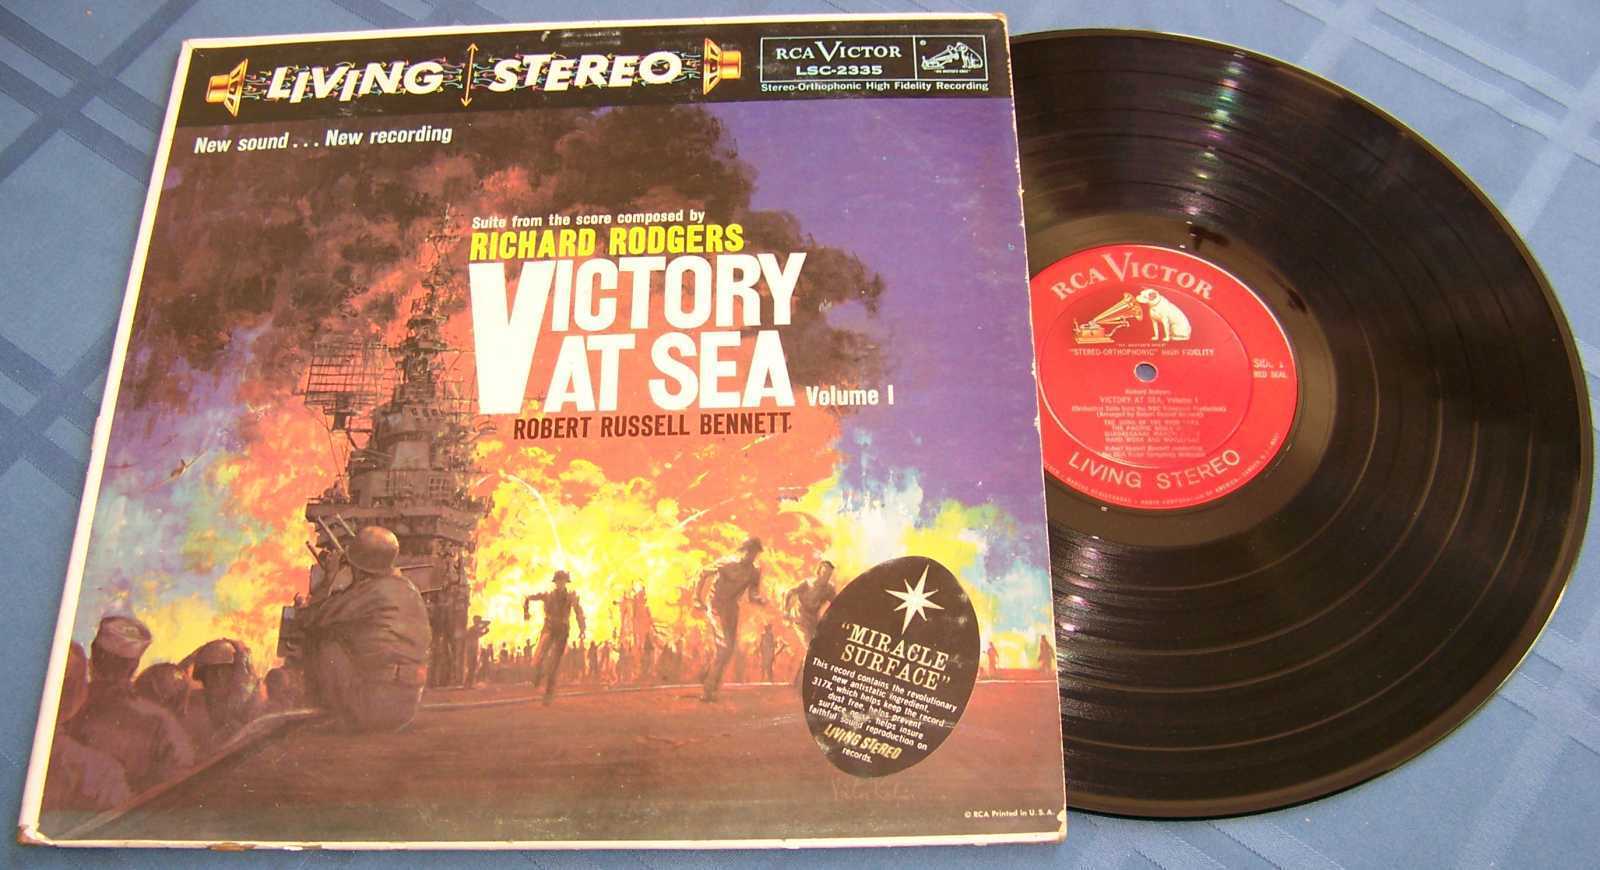 VICTORY AT SEA vol. 1 Richard Rodgers  LIVING STEREO LP record  RCA LSC-2335